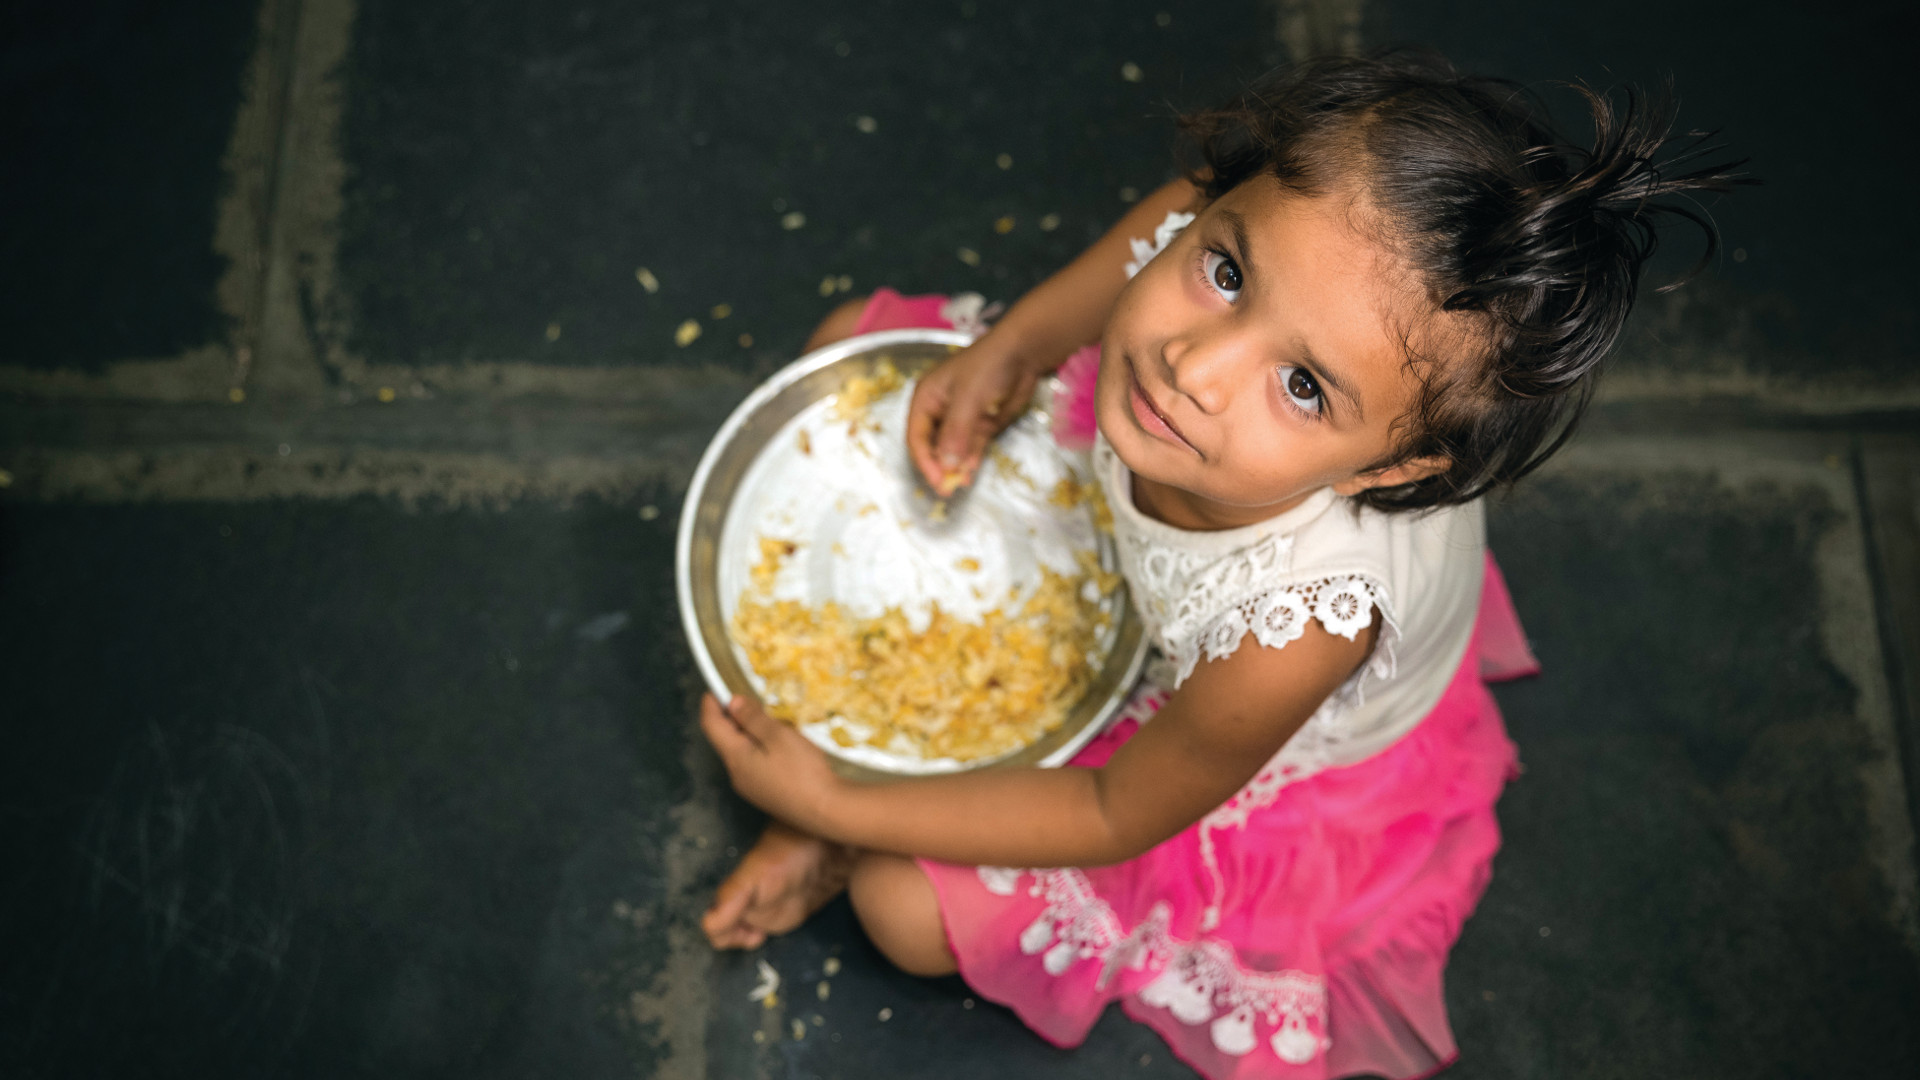 India Nutrition Initiative by Tata Trusts